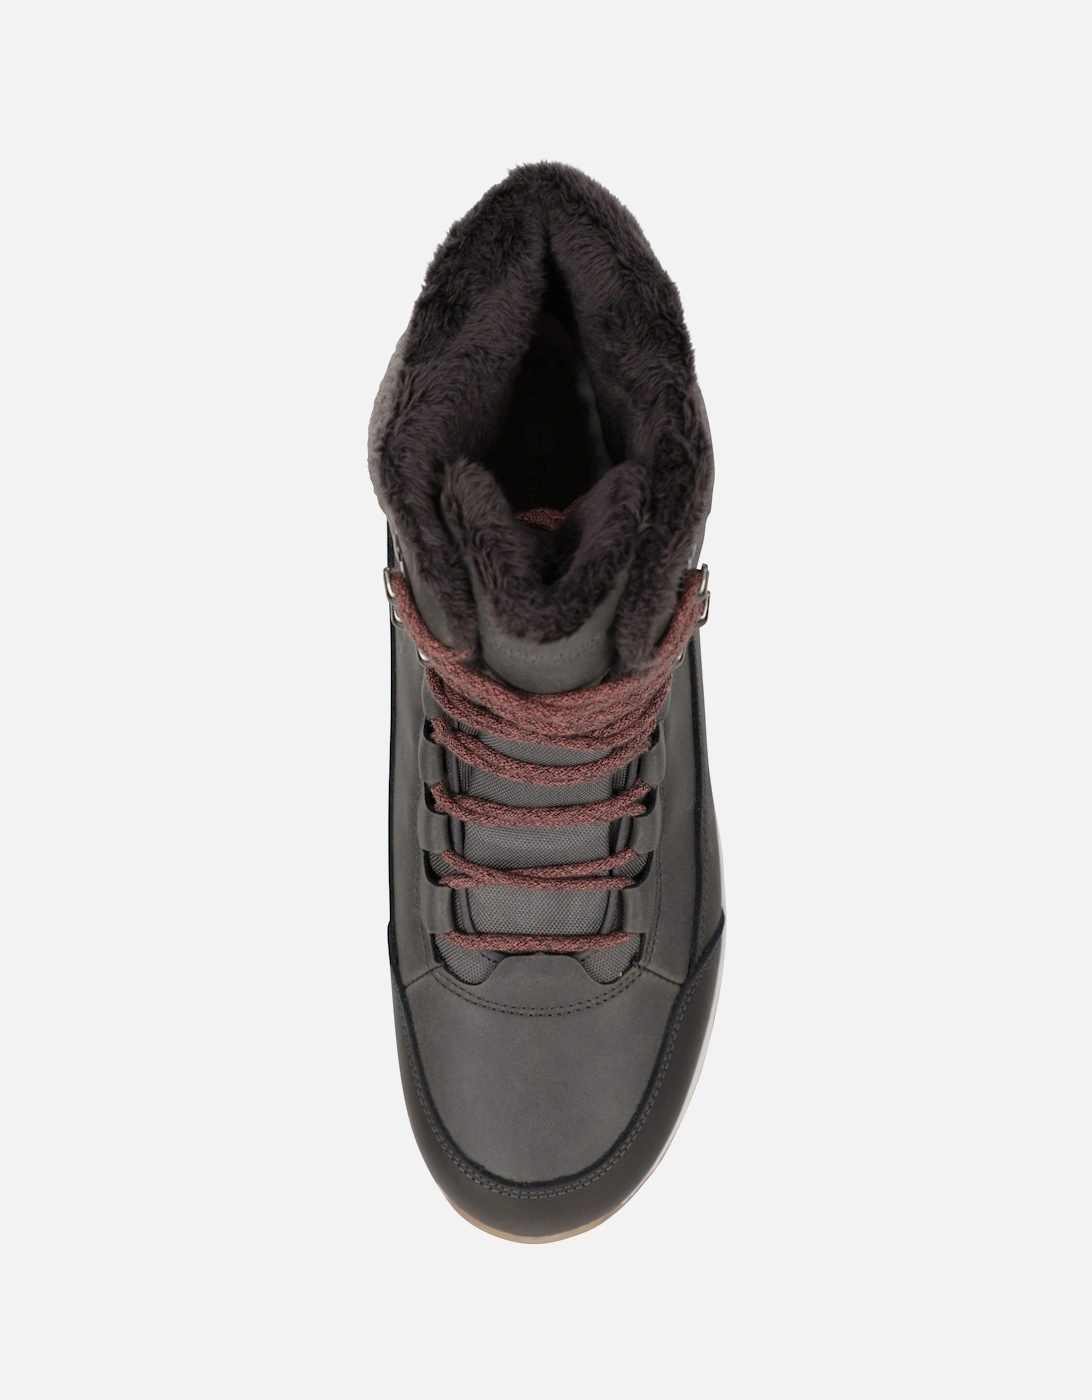 Womens/Ladies Tundra Leather Snow Boots